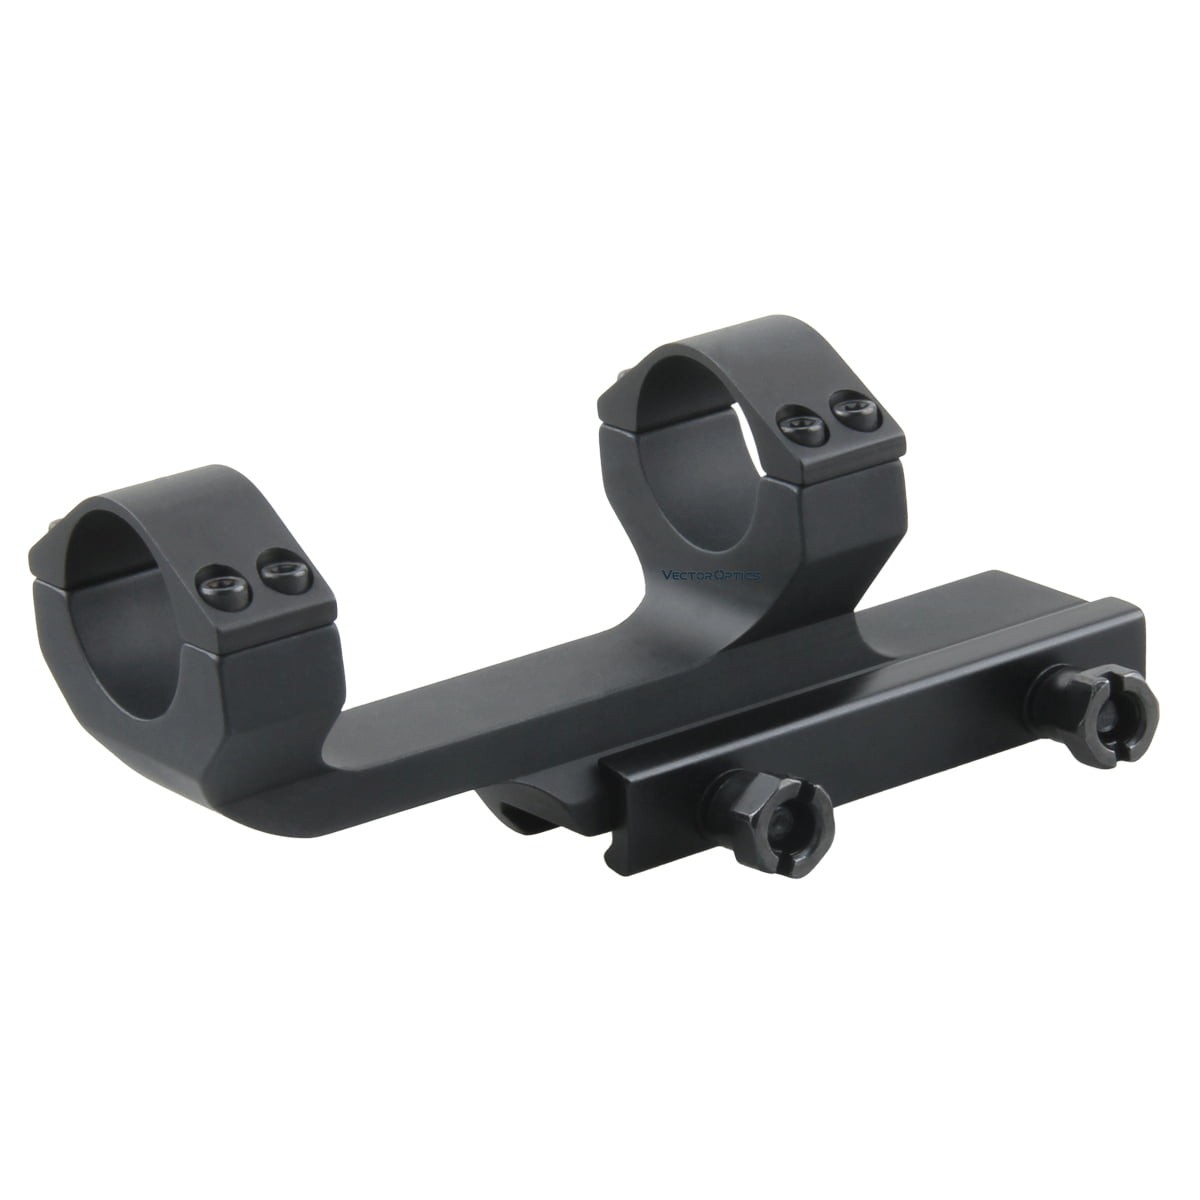 25.4mm 1-Piece Cantilever Picatinny Mount